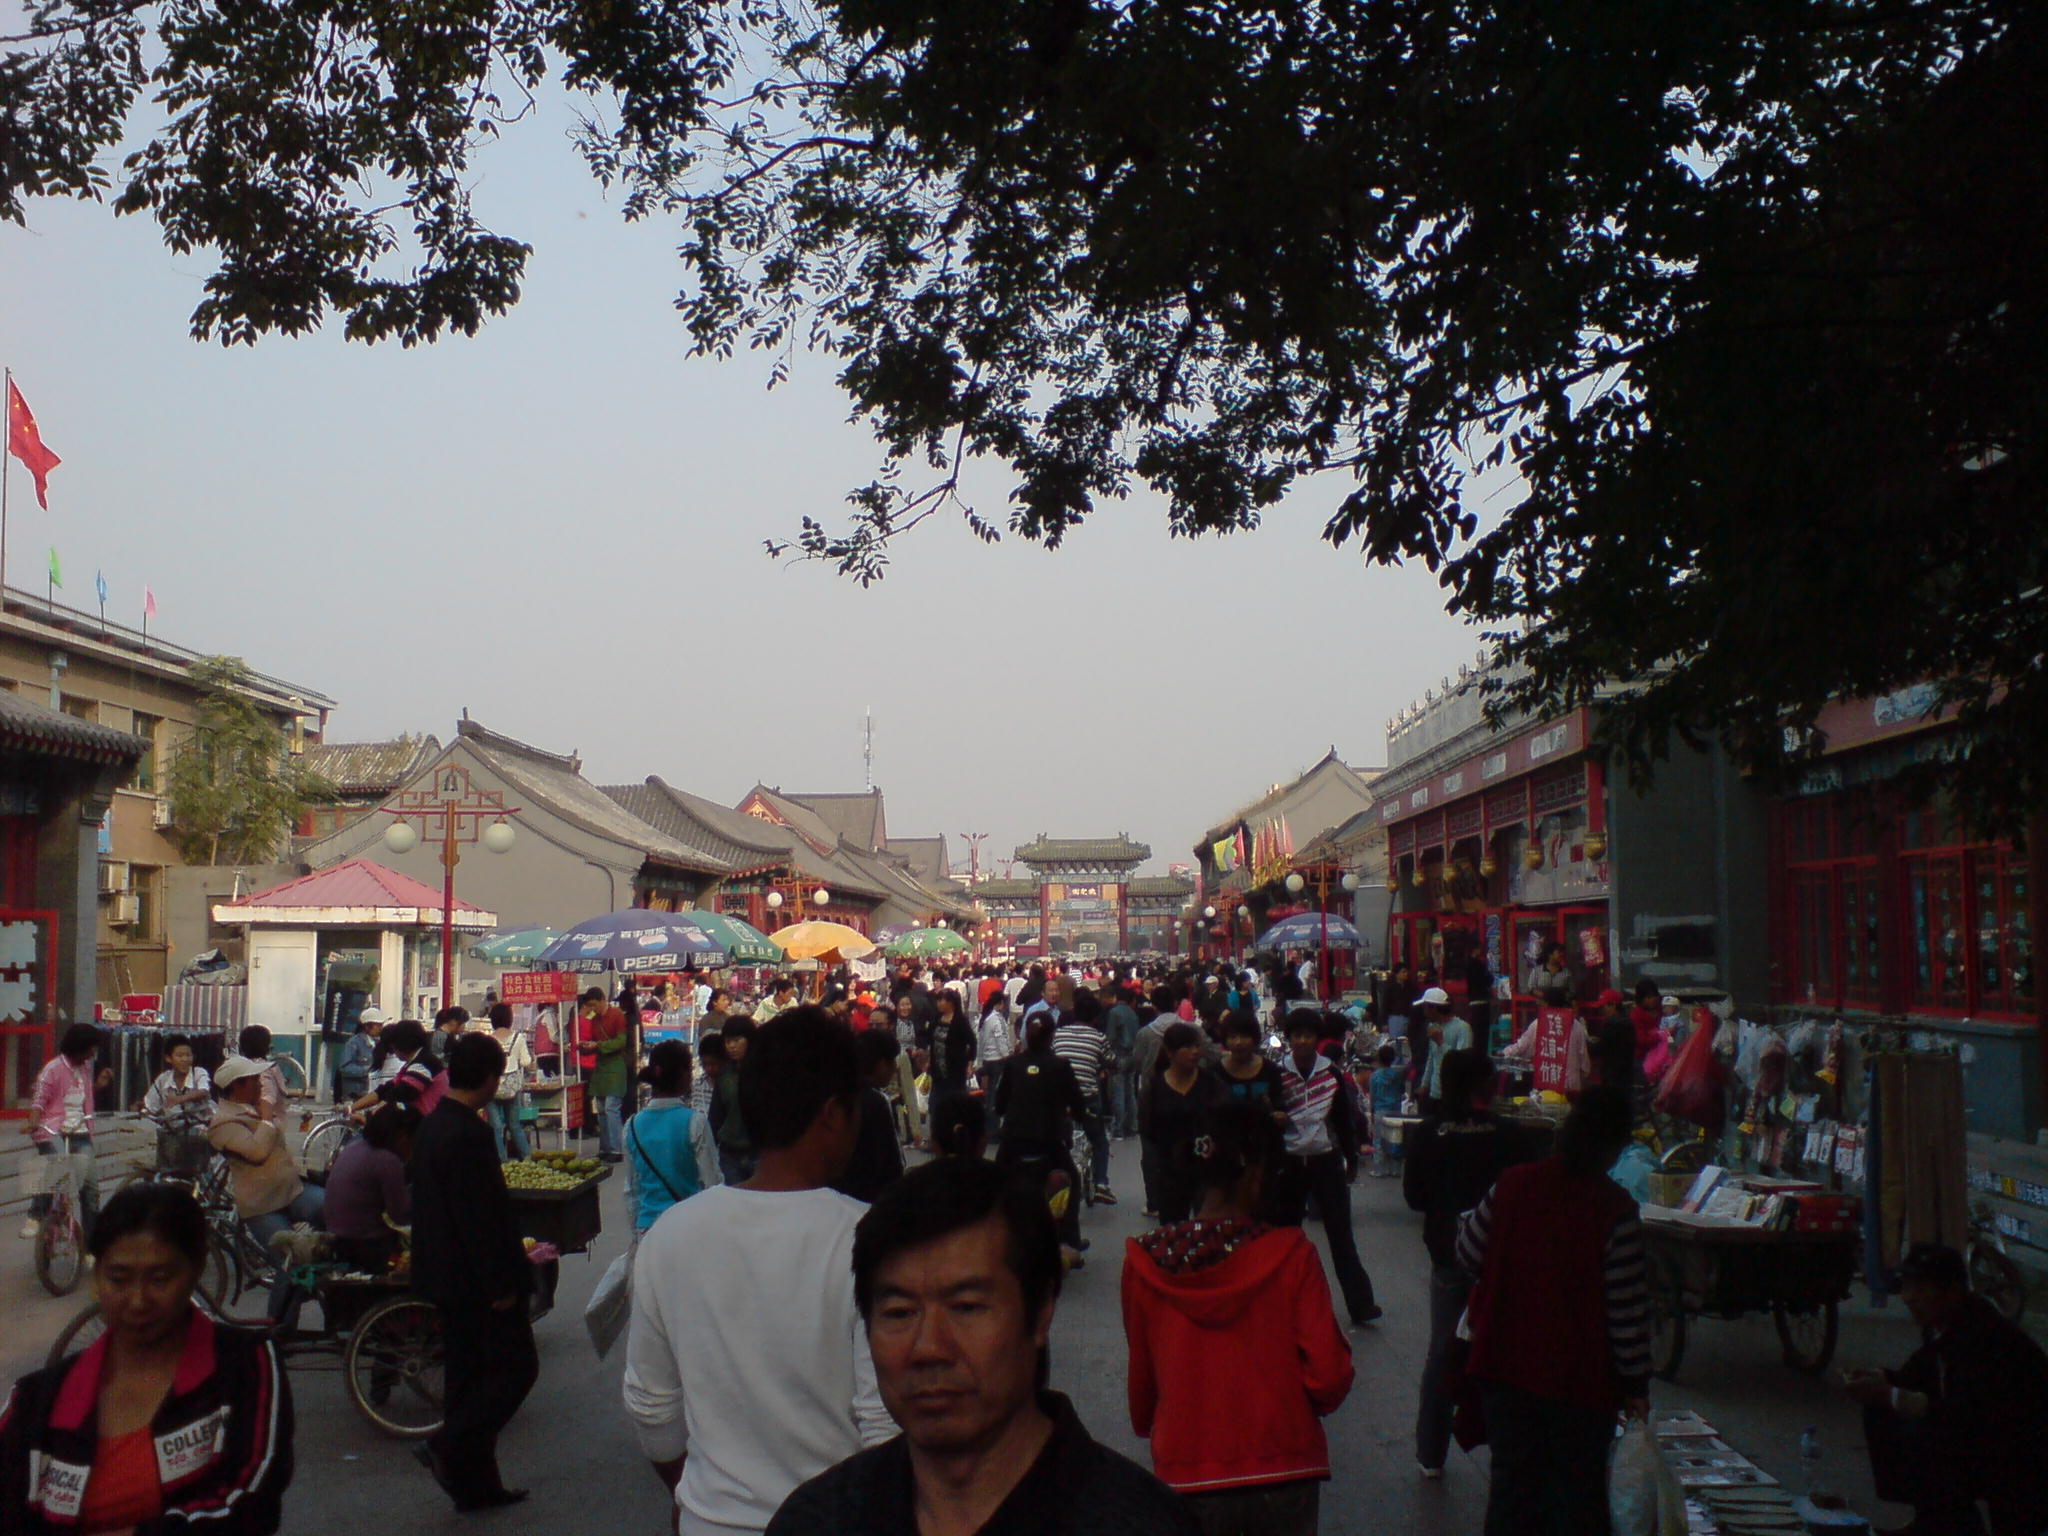 large group of people with various shopping on the sides of the street